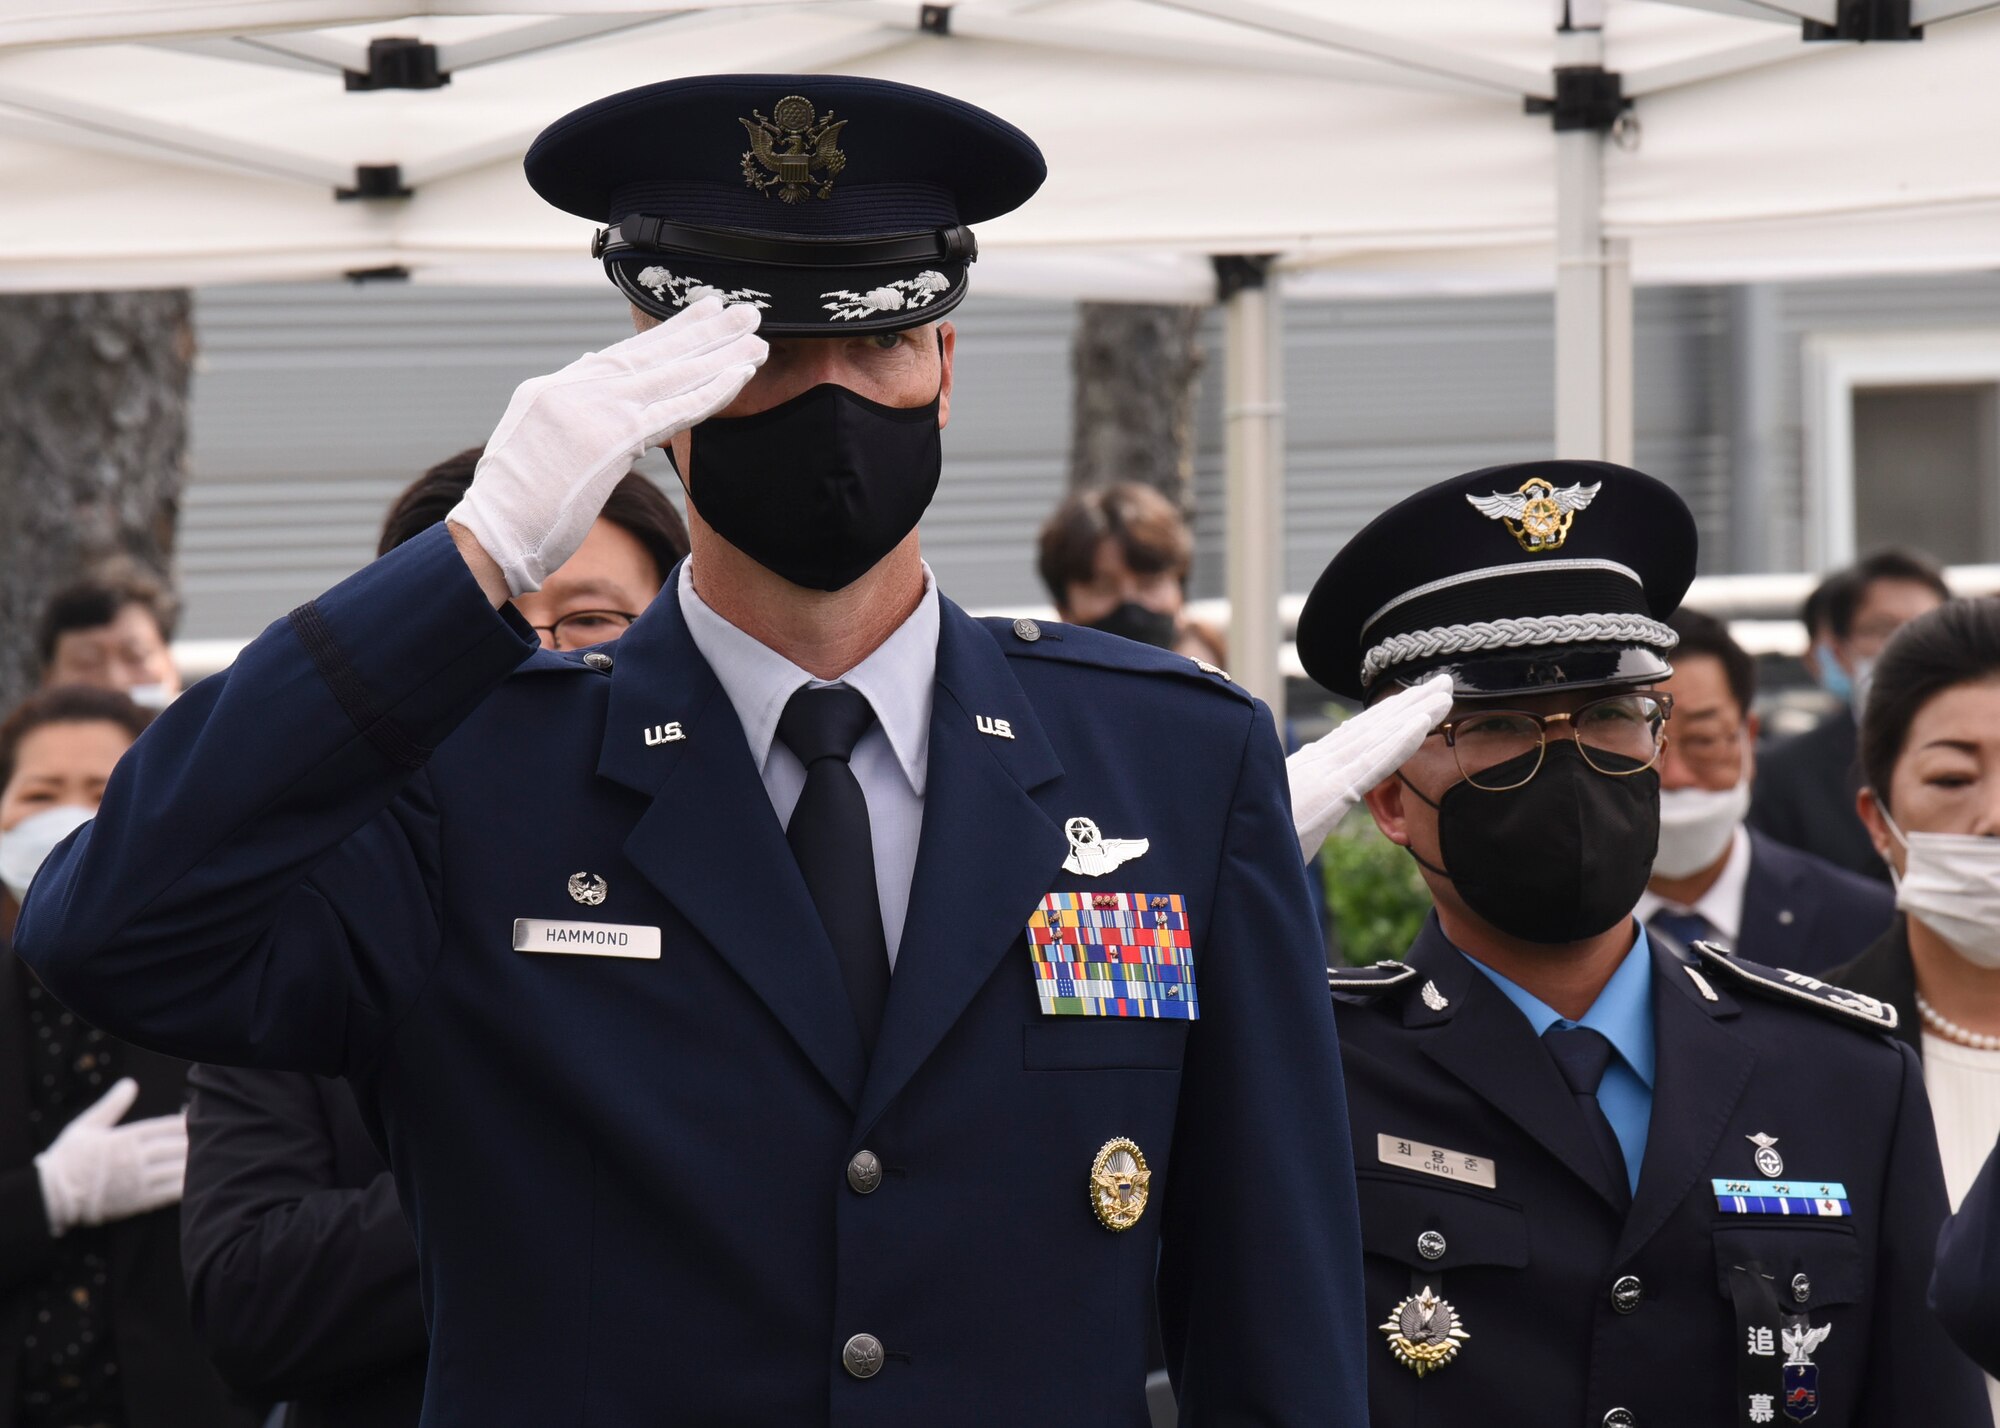 U.S. Air Force Col. Chris Hammond, 8th Fighter Wing commander, salutes in respect to the fallen during the Korean Memorial Day ceremony in Gunsan City, Republic of Korea, June 6, 2020. The Korean citizens who died while serving in the military and those who lost their lives during the independence movement were honored with white carnations during the ceremony while flags and flowers were displayed at each headstone. (U.S. Air Force photo by Staff Sgt. Anthony Hetlage)